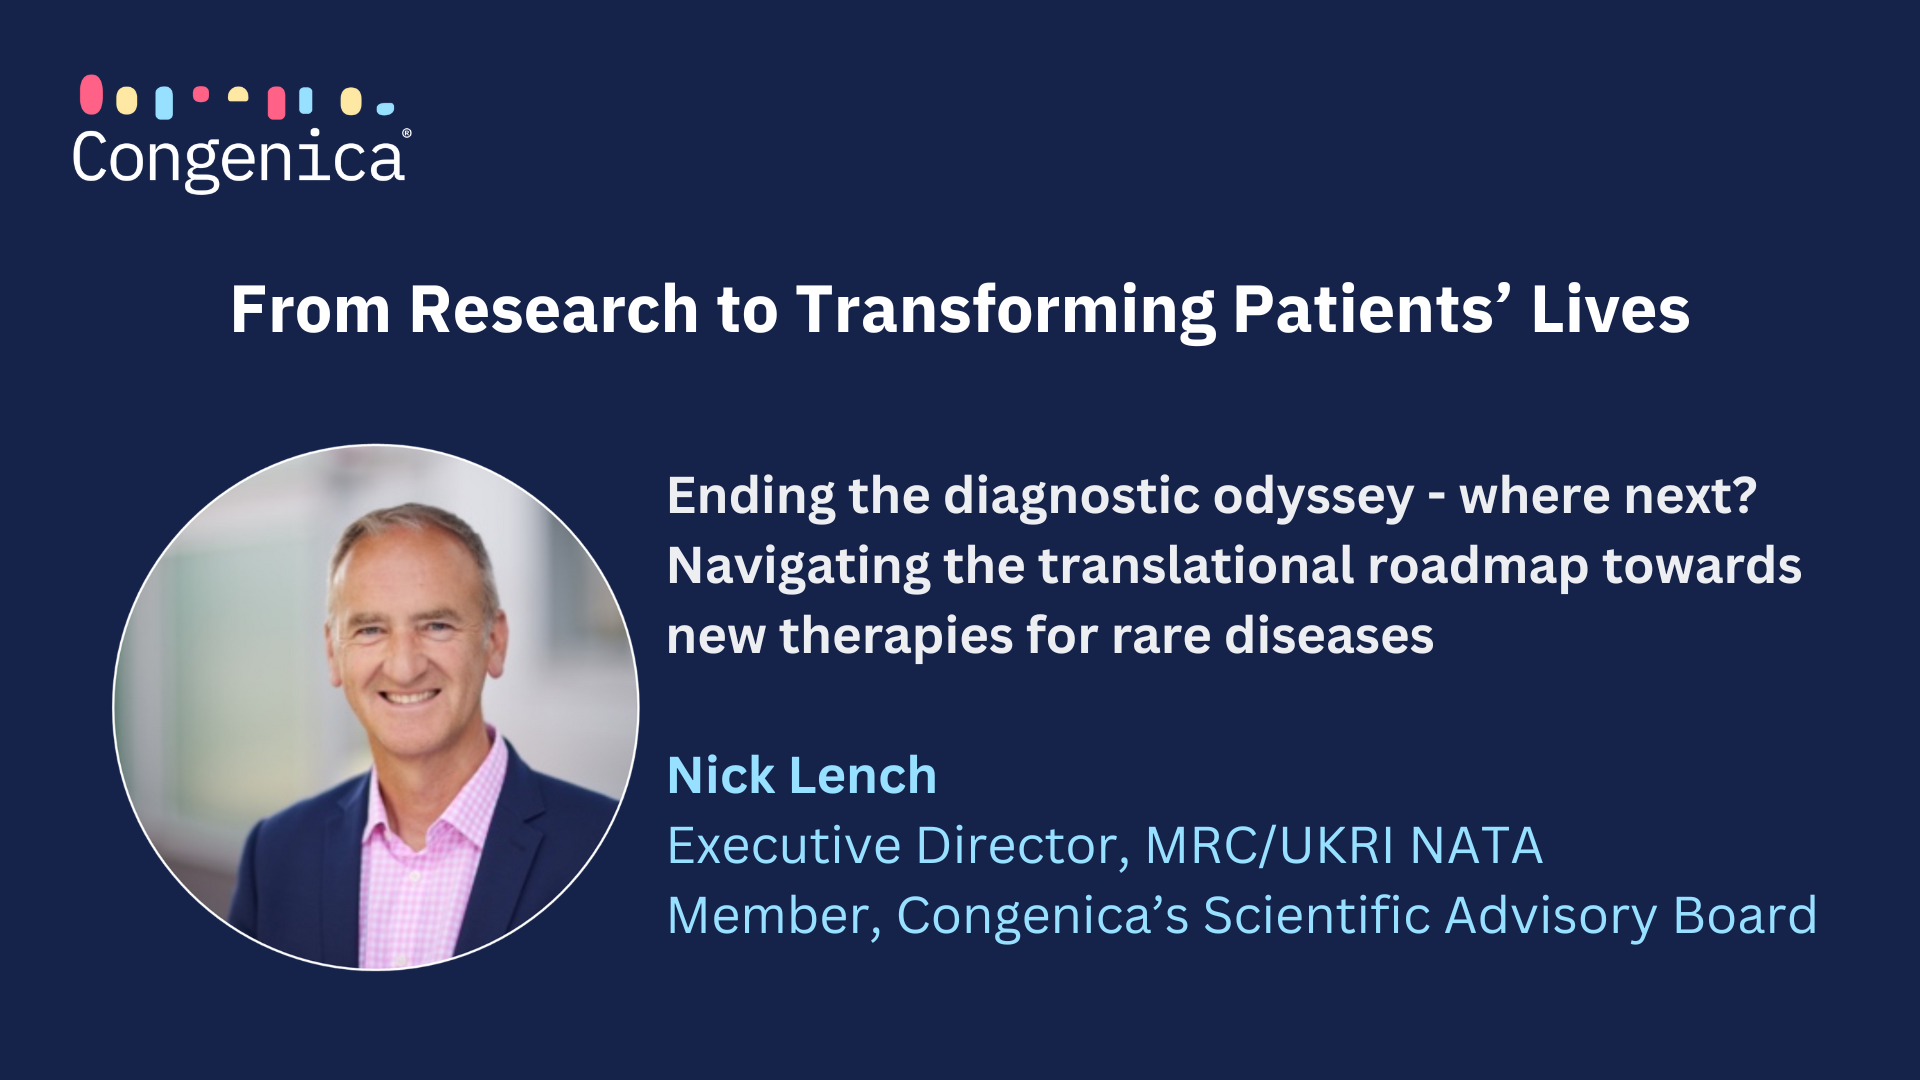 Ending the diagnostic odyssey - where next? Navigating the translational roadmap towards new therapies for rare diseases 